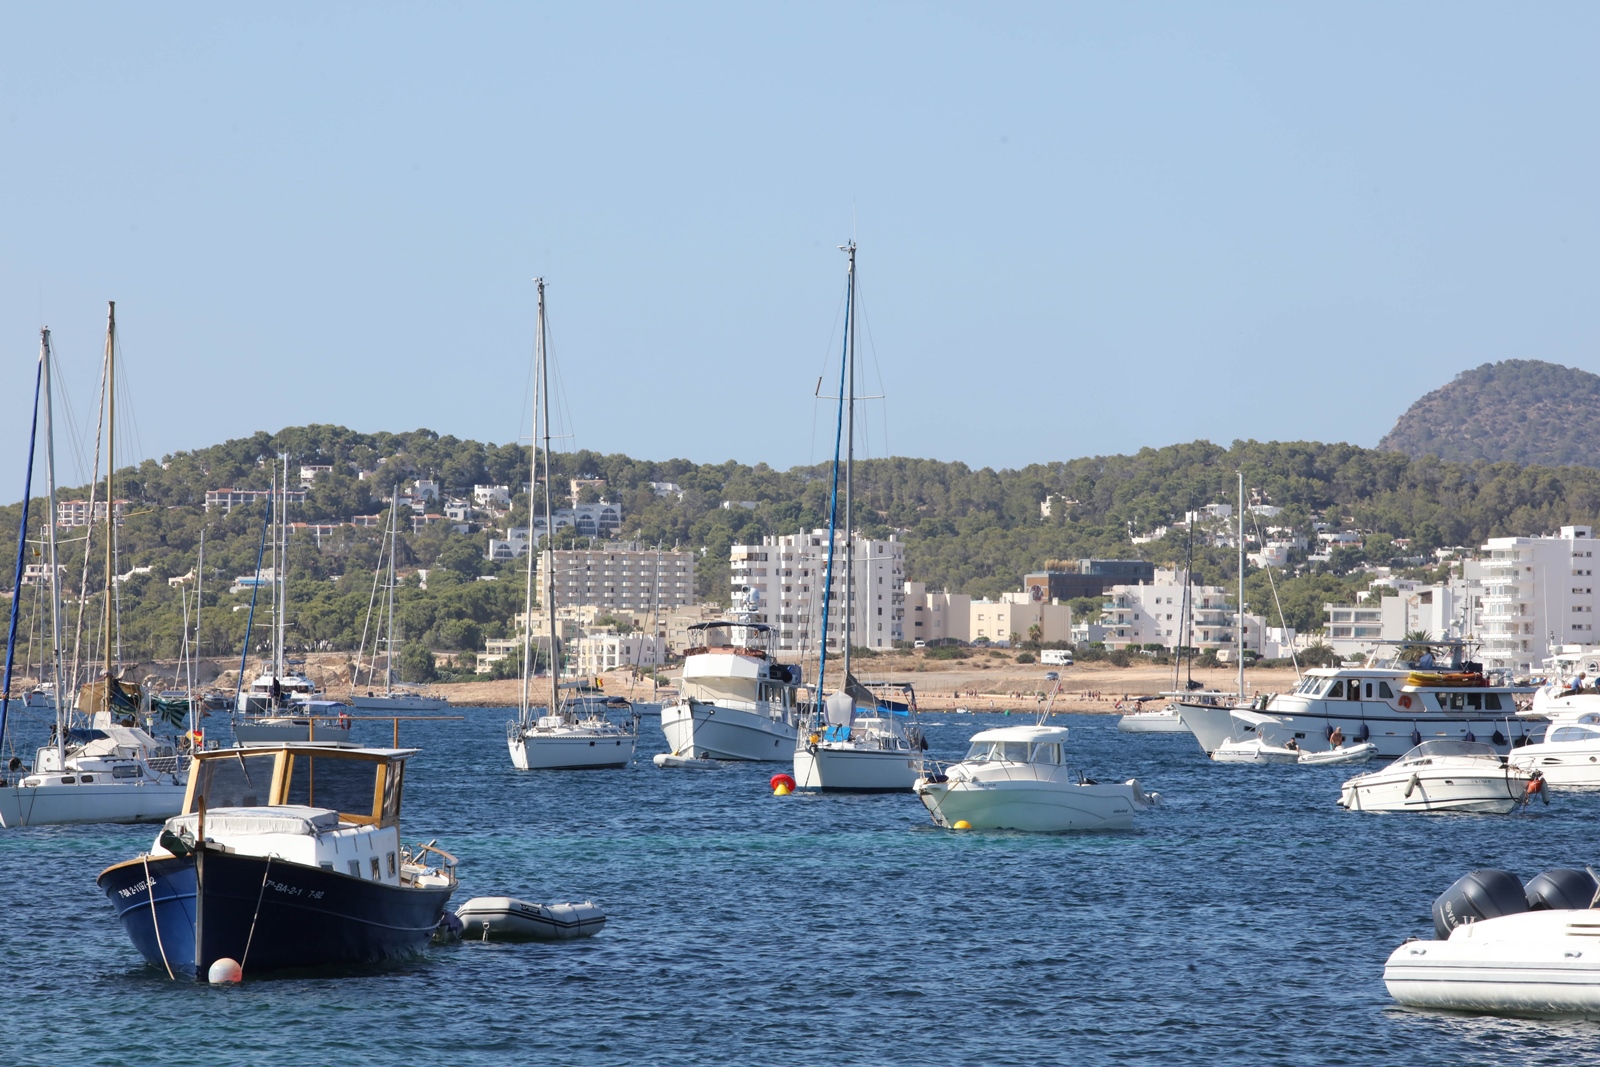 An Average Of One Hundred Boats Anchor Daily In The Bay Of Sant Antoni This Summer